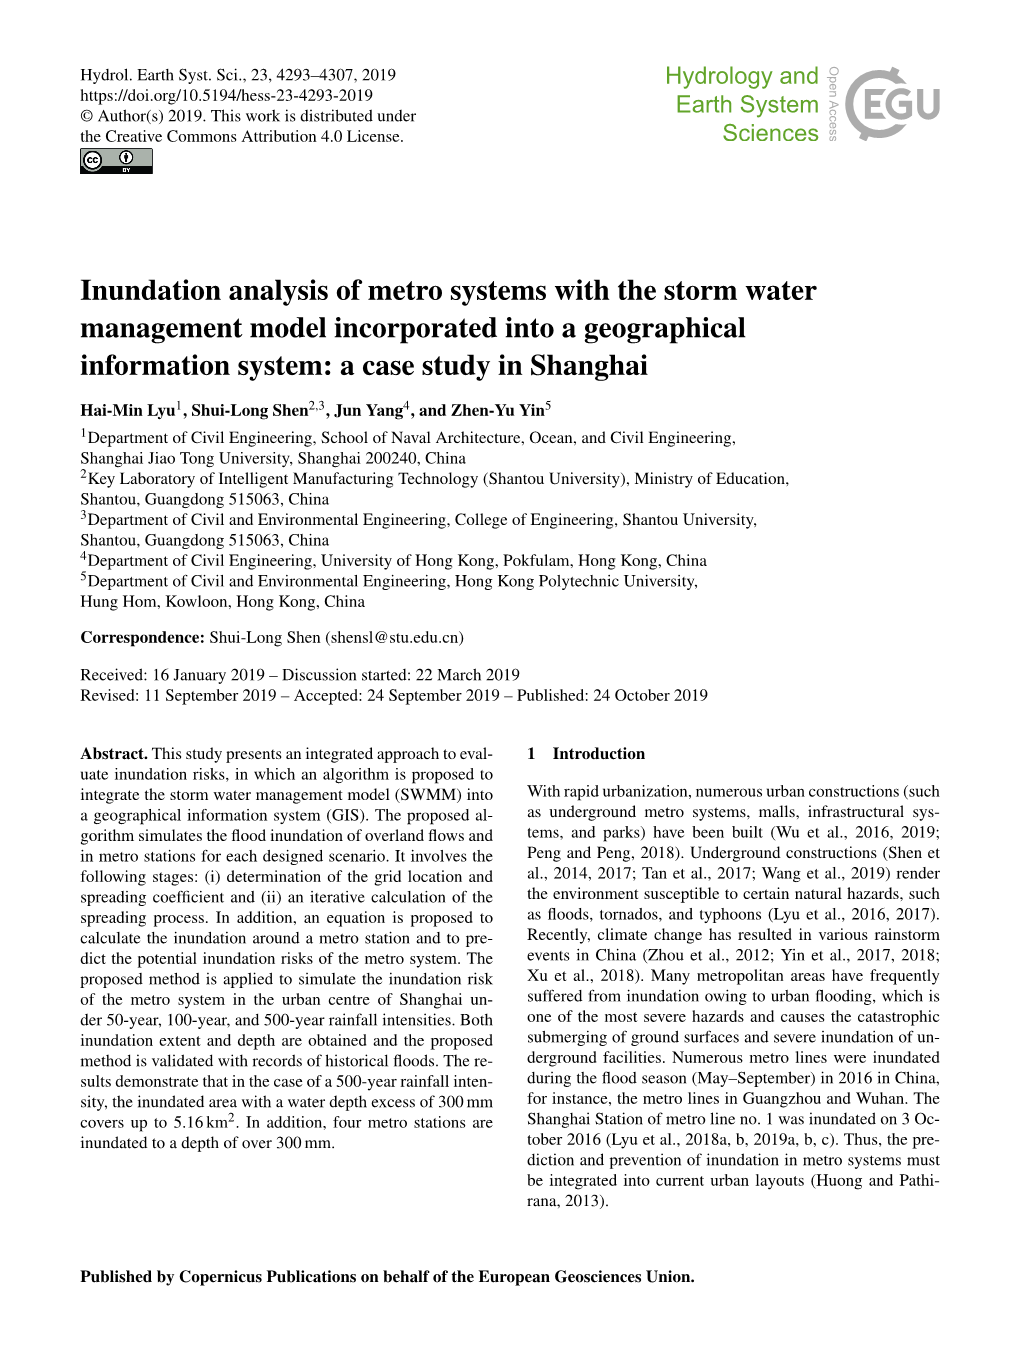 Inundation Analysis of Metro Systems with the Storm Water Management Model Incorporated Into a Geographical Information System: a Case Study in Shanghai